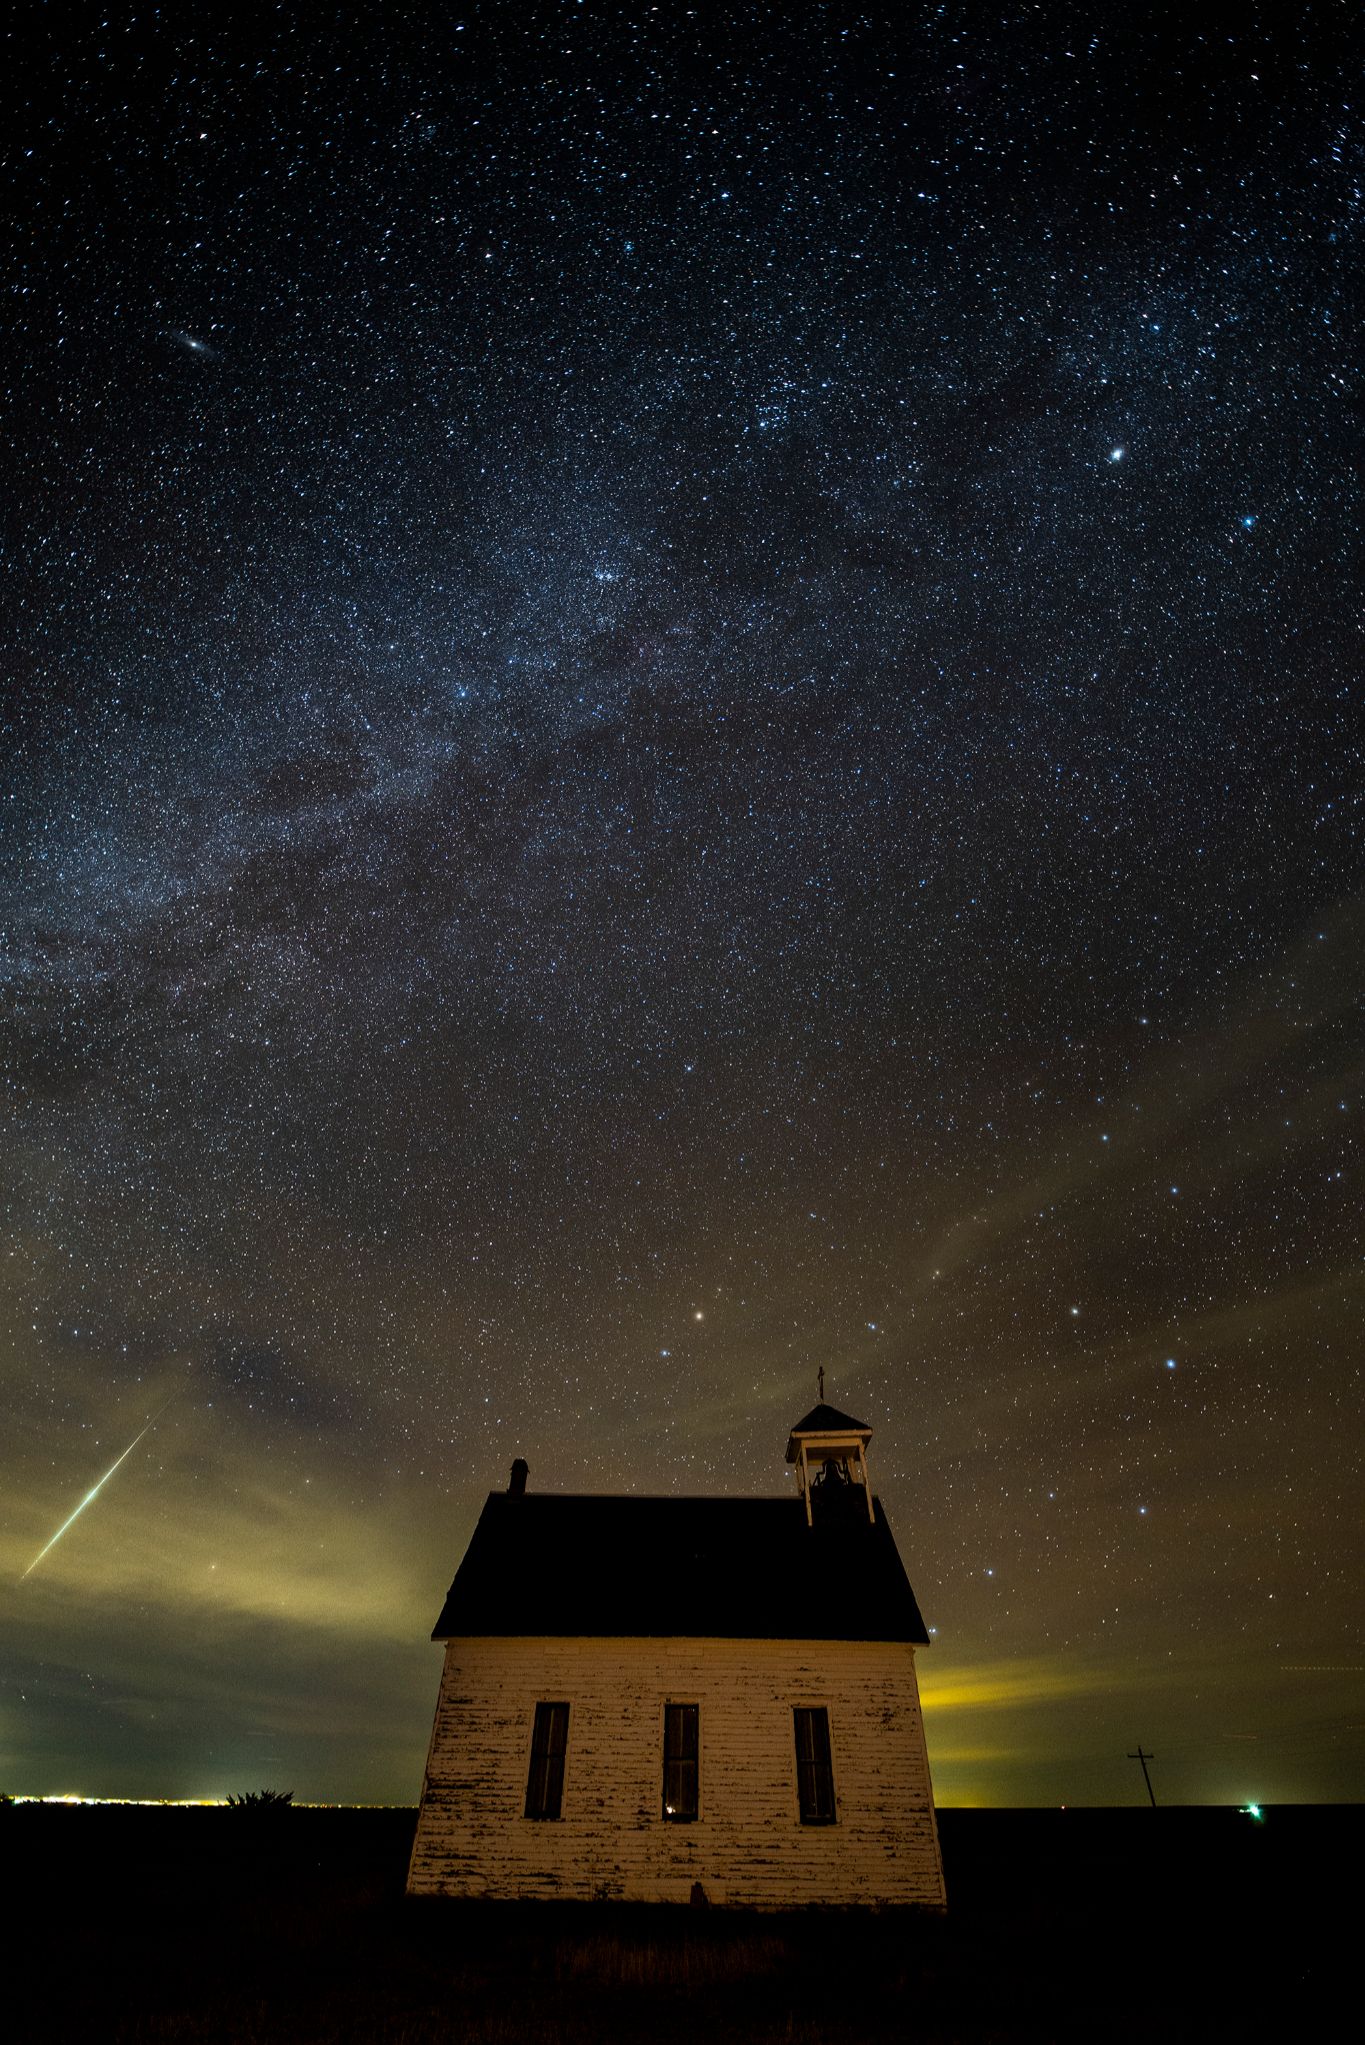 Small, old church in isolated location, dark sky, with a bright meteor streaking through the scene.